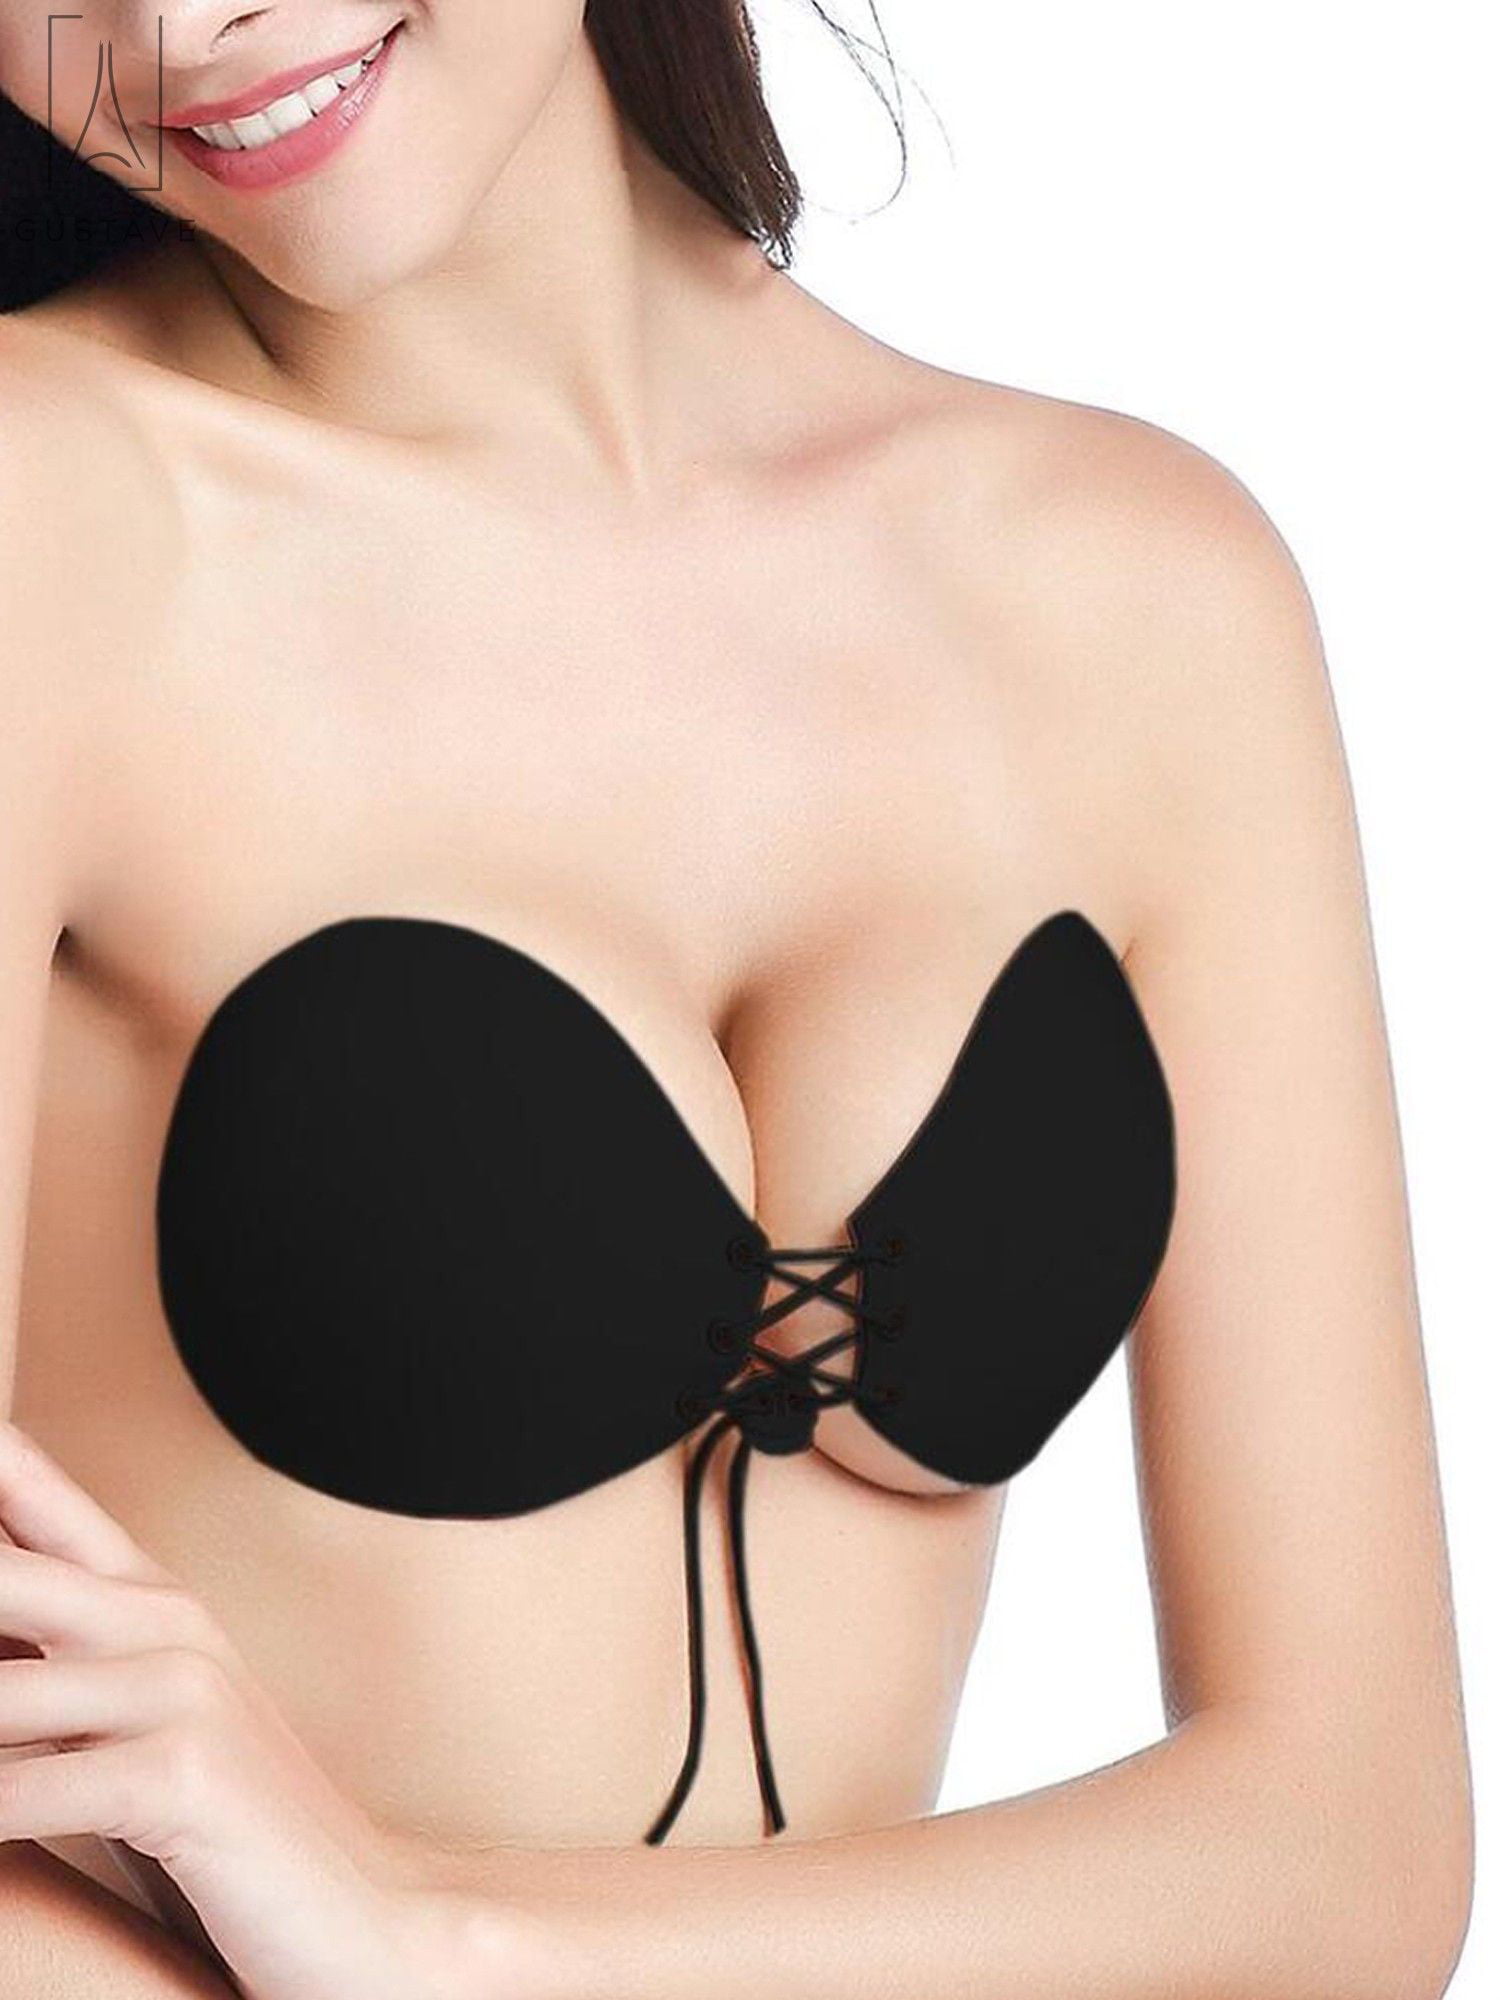 Women Abcd Cup Strapless Bra for Evening Dresses Push up Invisible